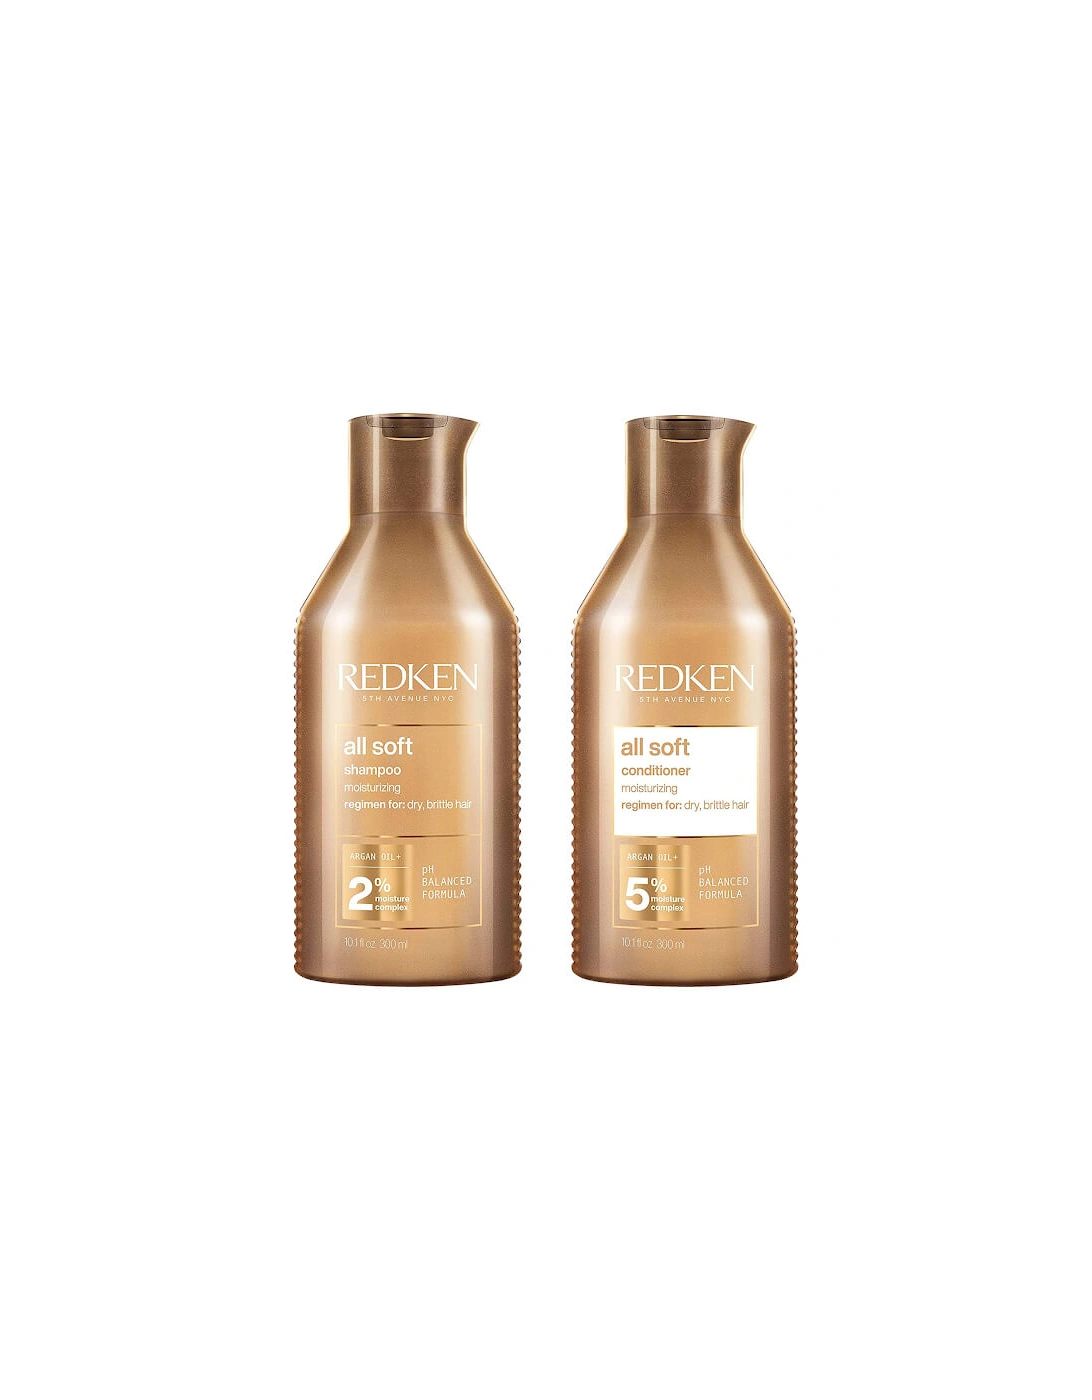 All Soft Moisturising Shampoo and Conditioner 300ml Bundle For Dry Hair - - All Soft Duo (2 Products) - Beano54, 2 of 1